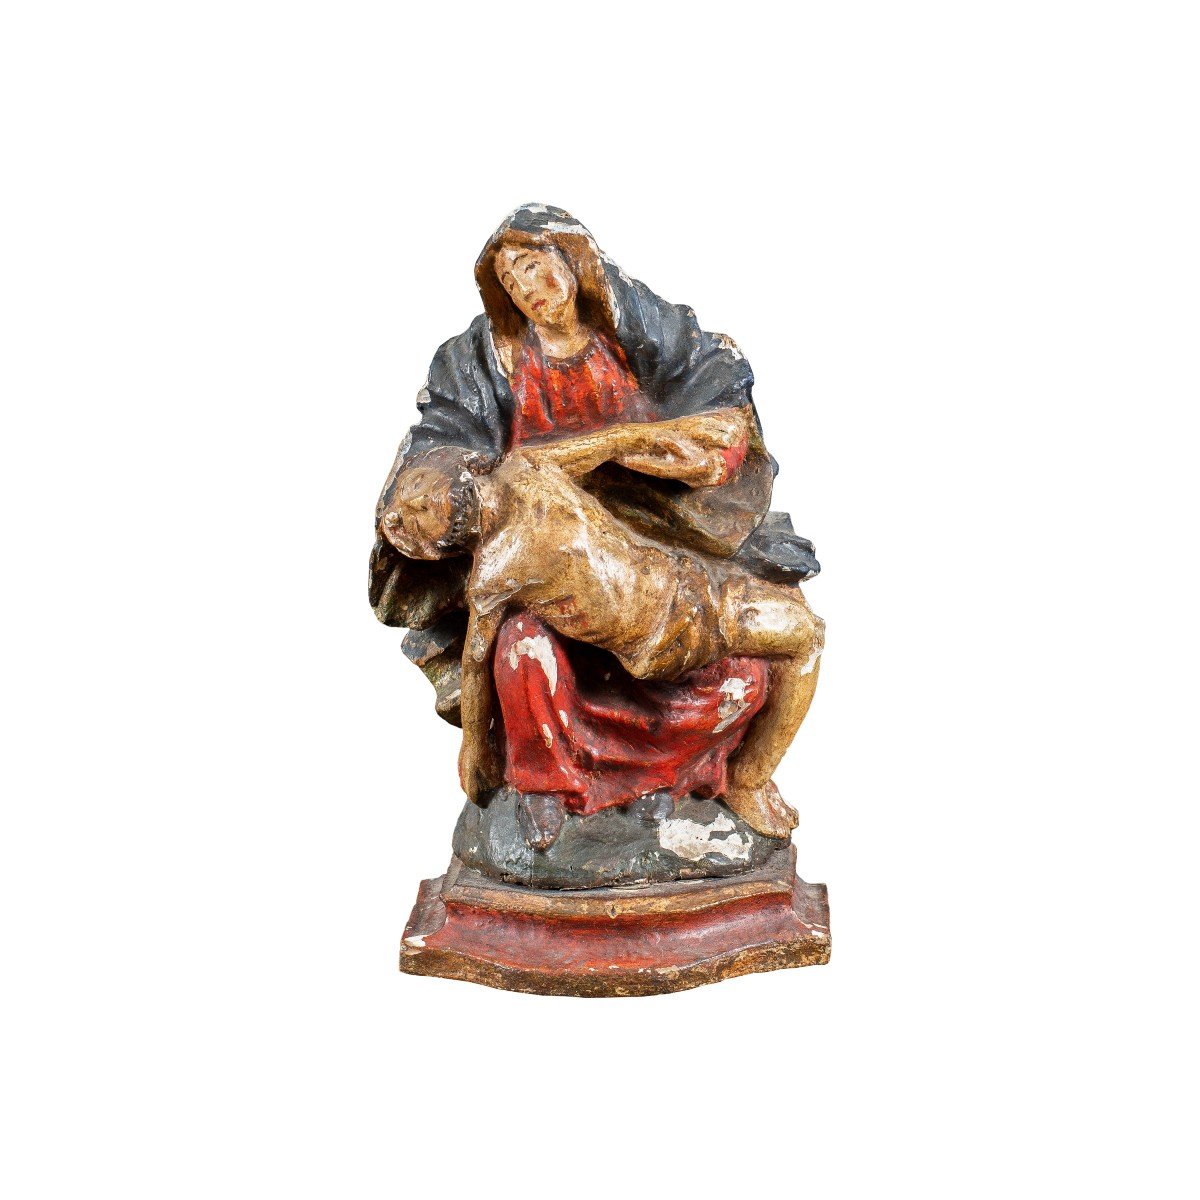 Carved And Painted Wooden Sculpture - Pietà - Italy, 18th Century